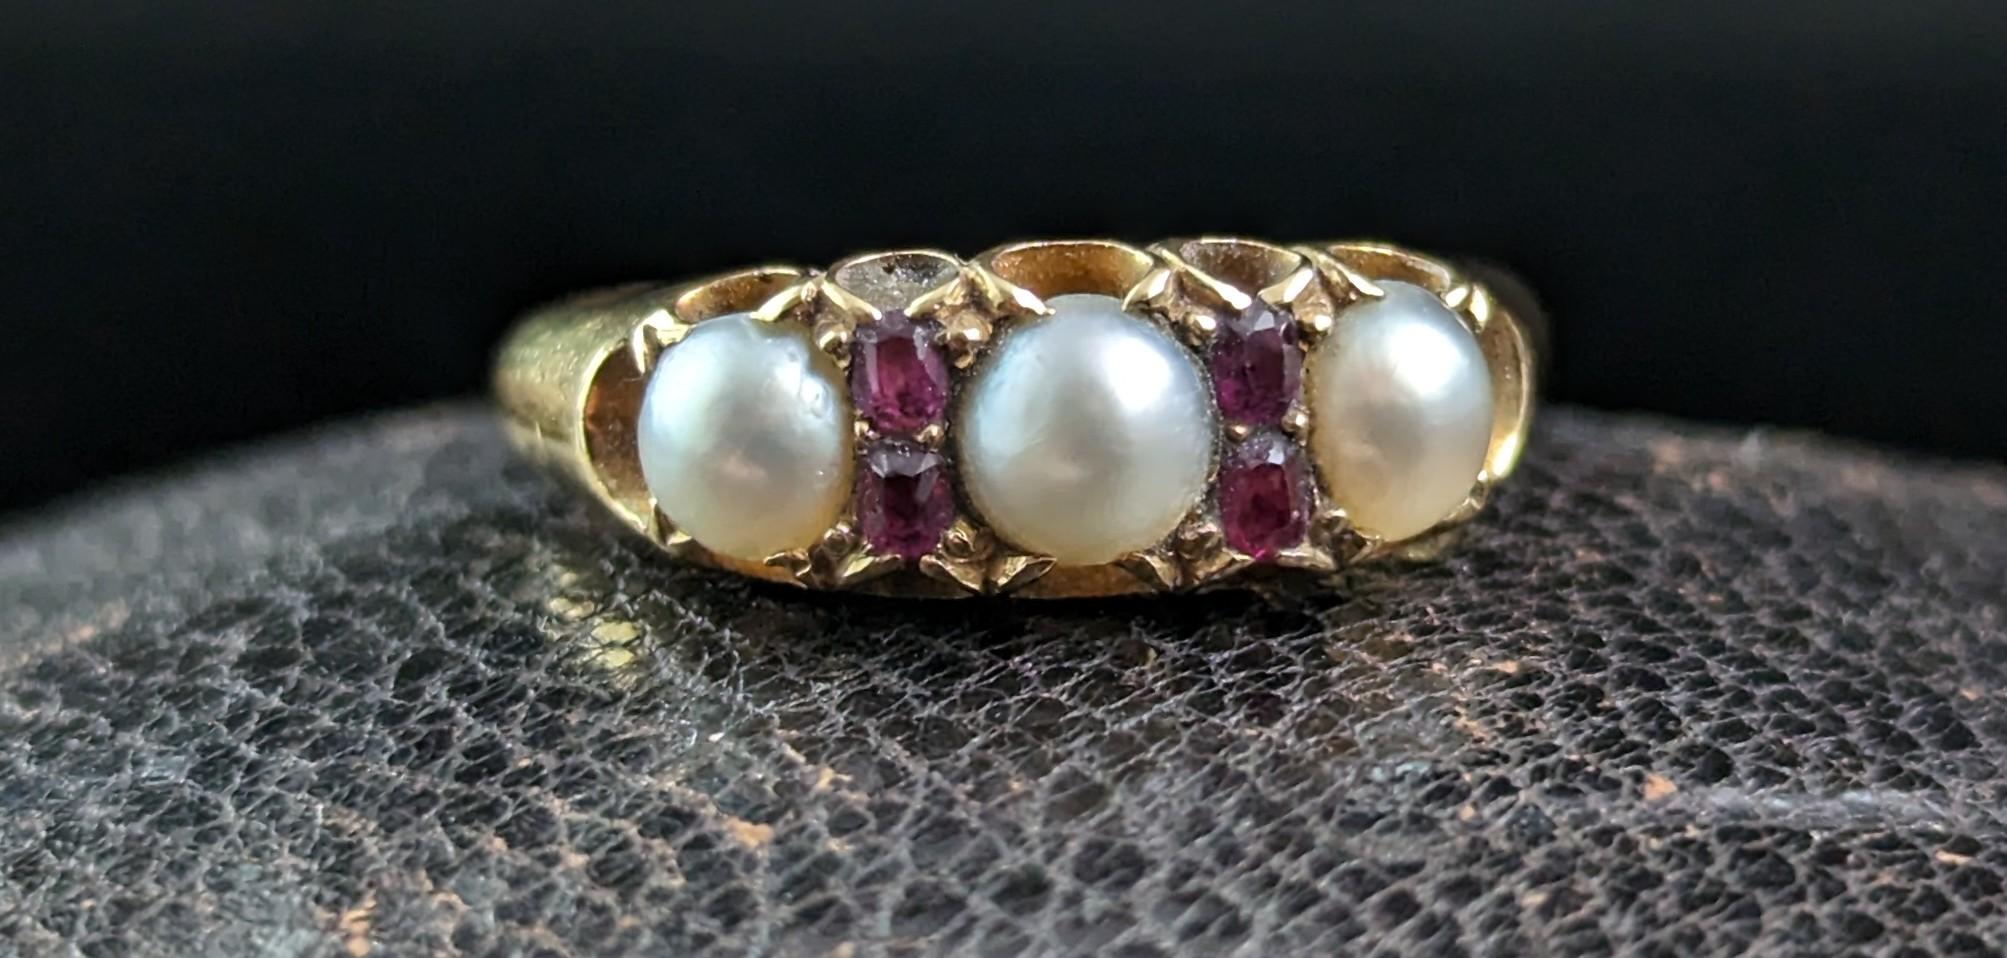 This antique Ruby and Split pearl ring is simply divine.

The cool creamy pearls contrast beautifully with the deep pinky red rubies and the rich buttery gold.

It features three creamy, split pearls with blue undertones and nestled in between the